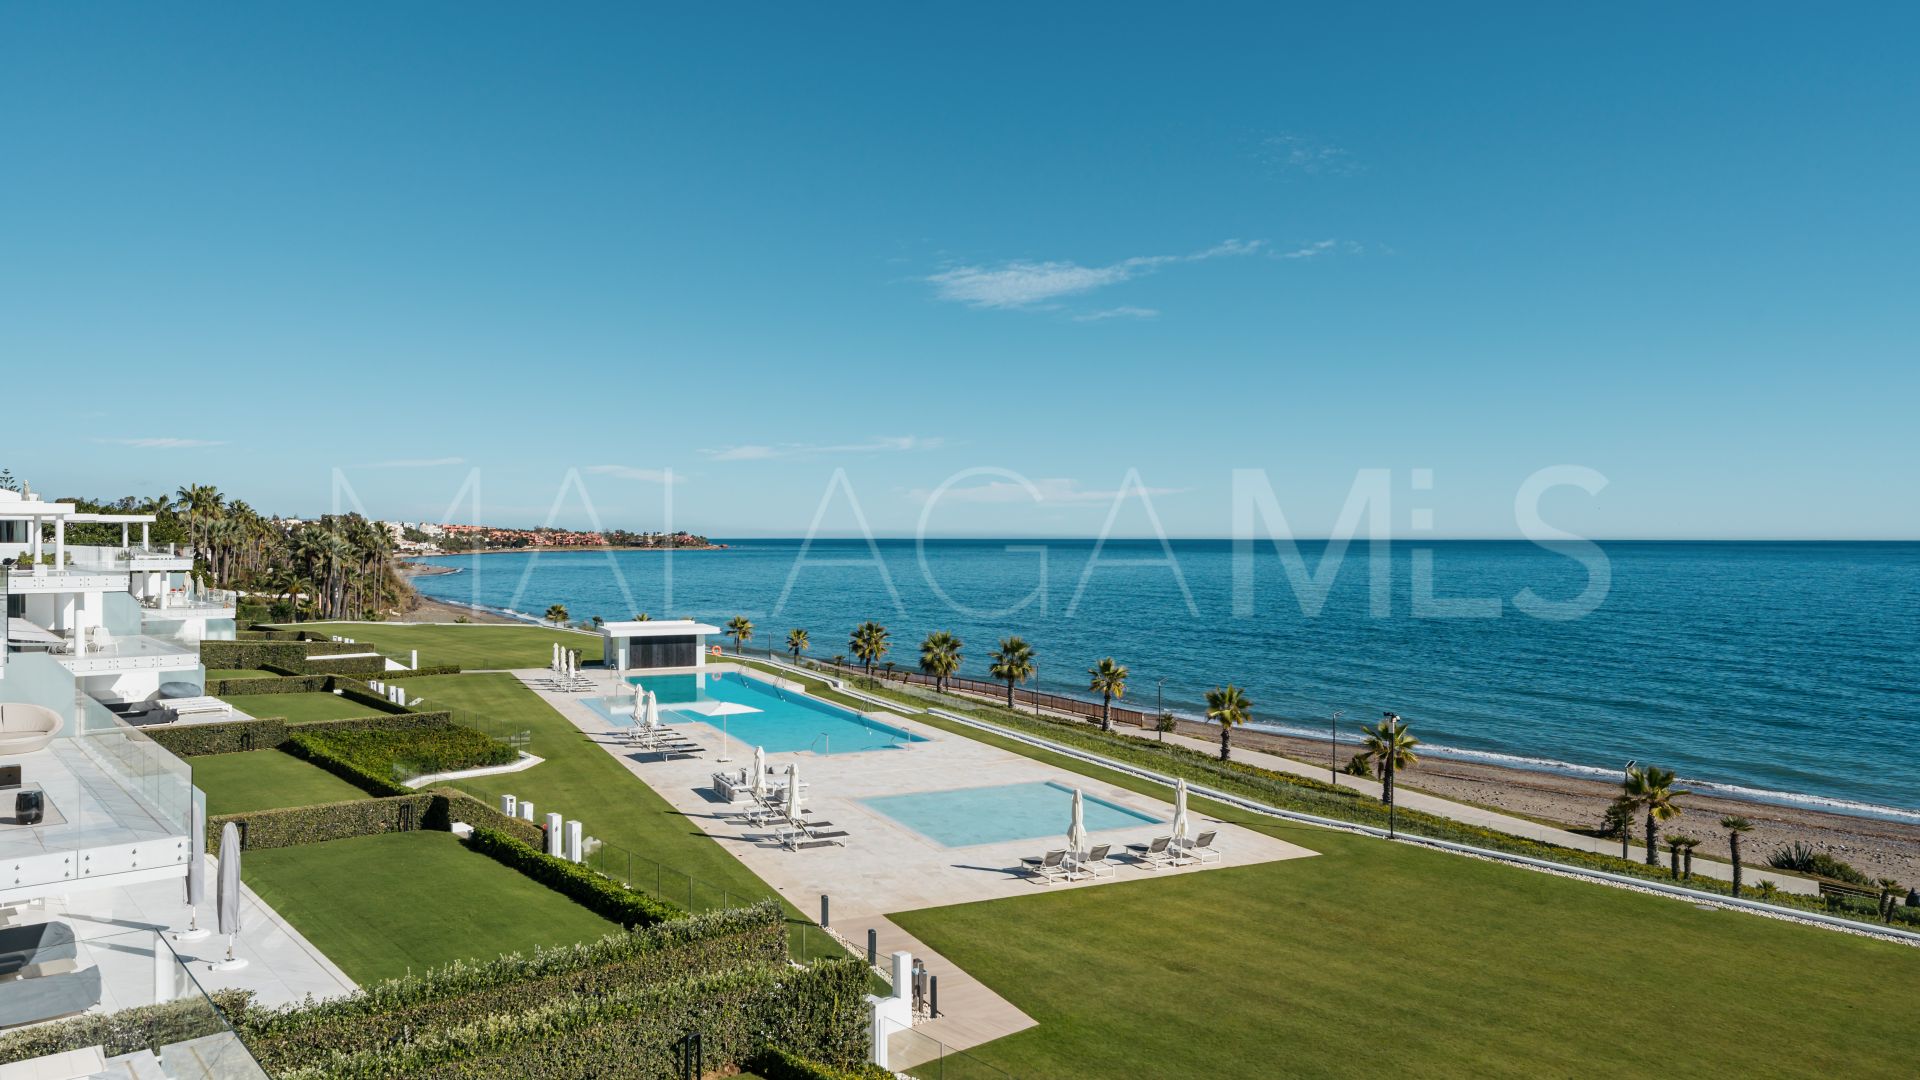 4 bedrooms penthouse in Emare for sale